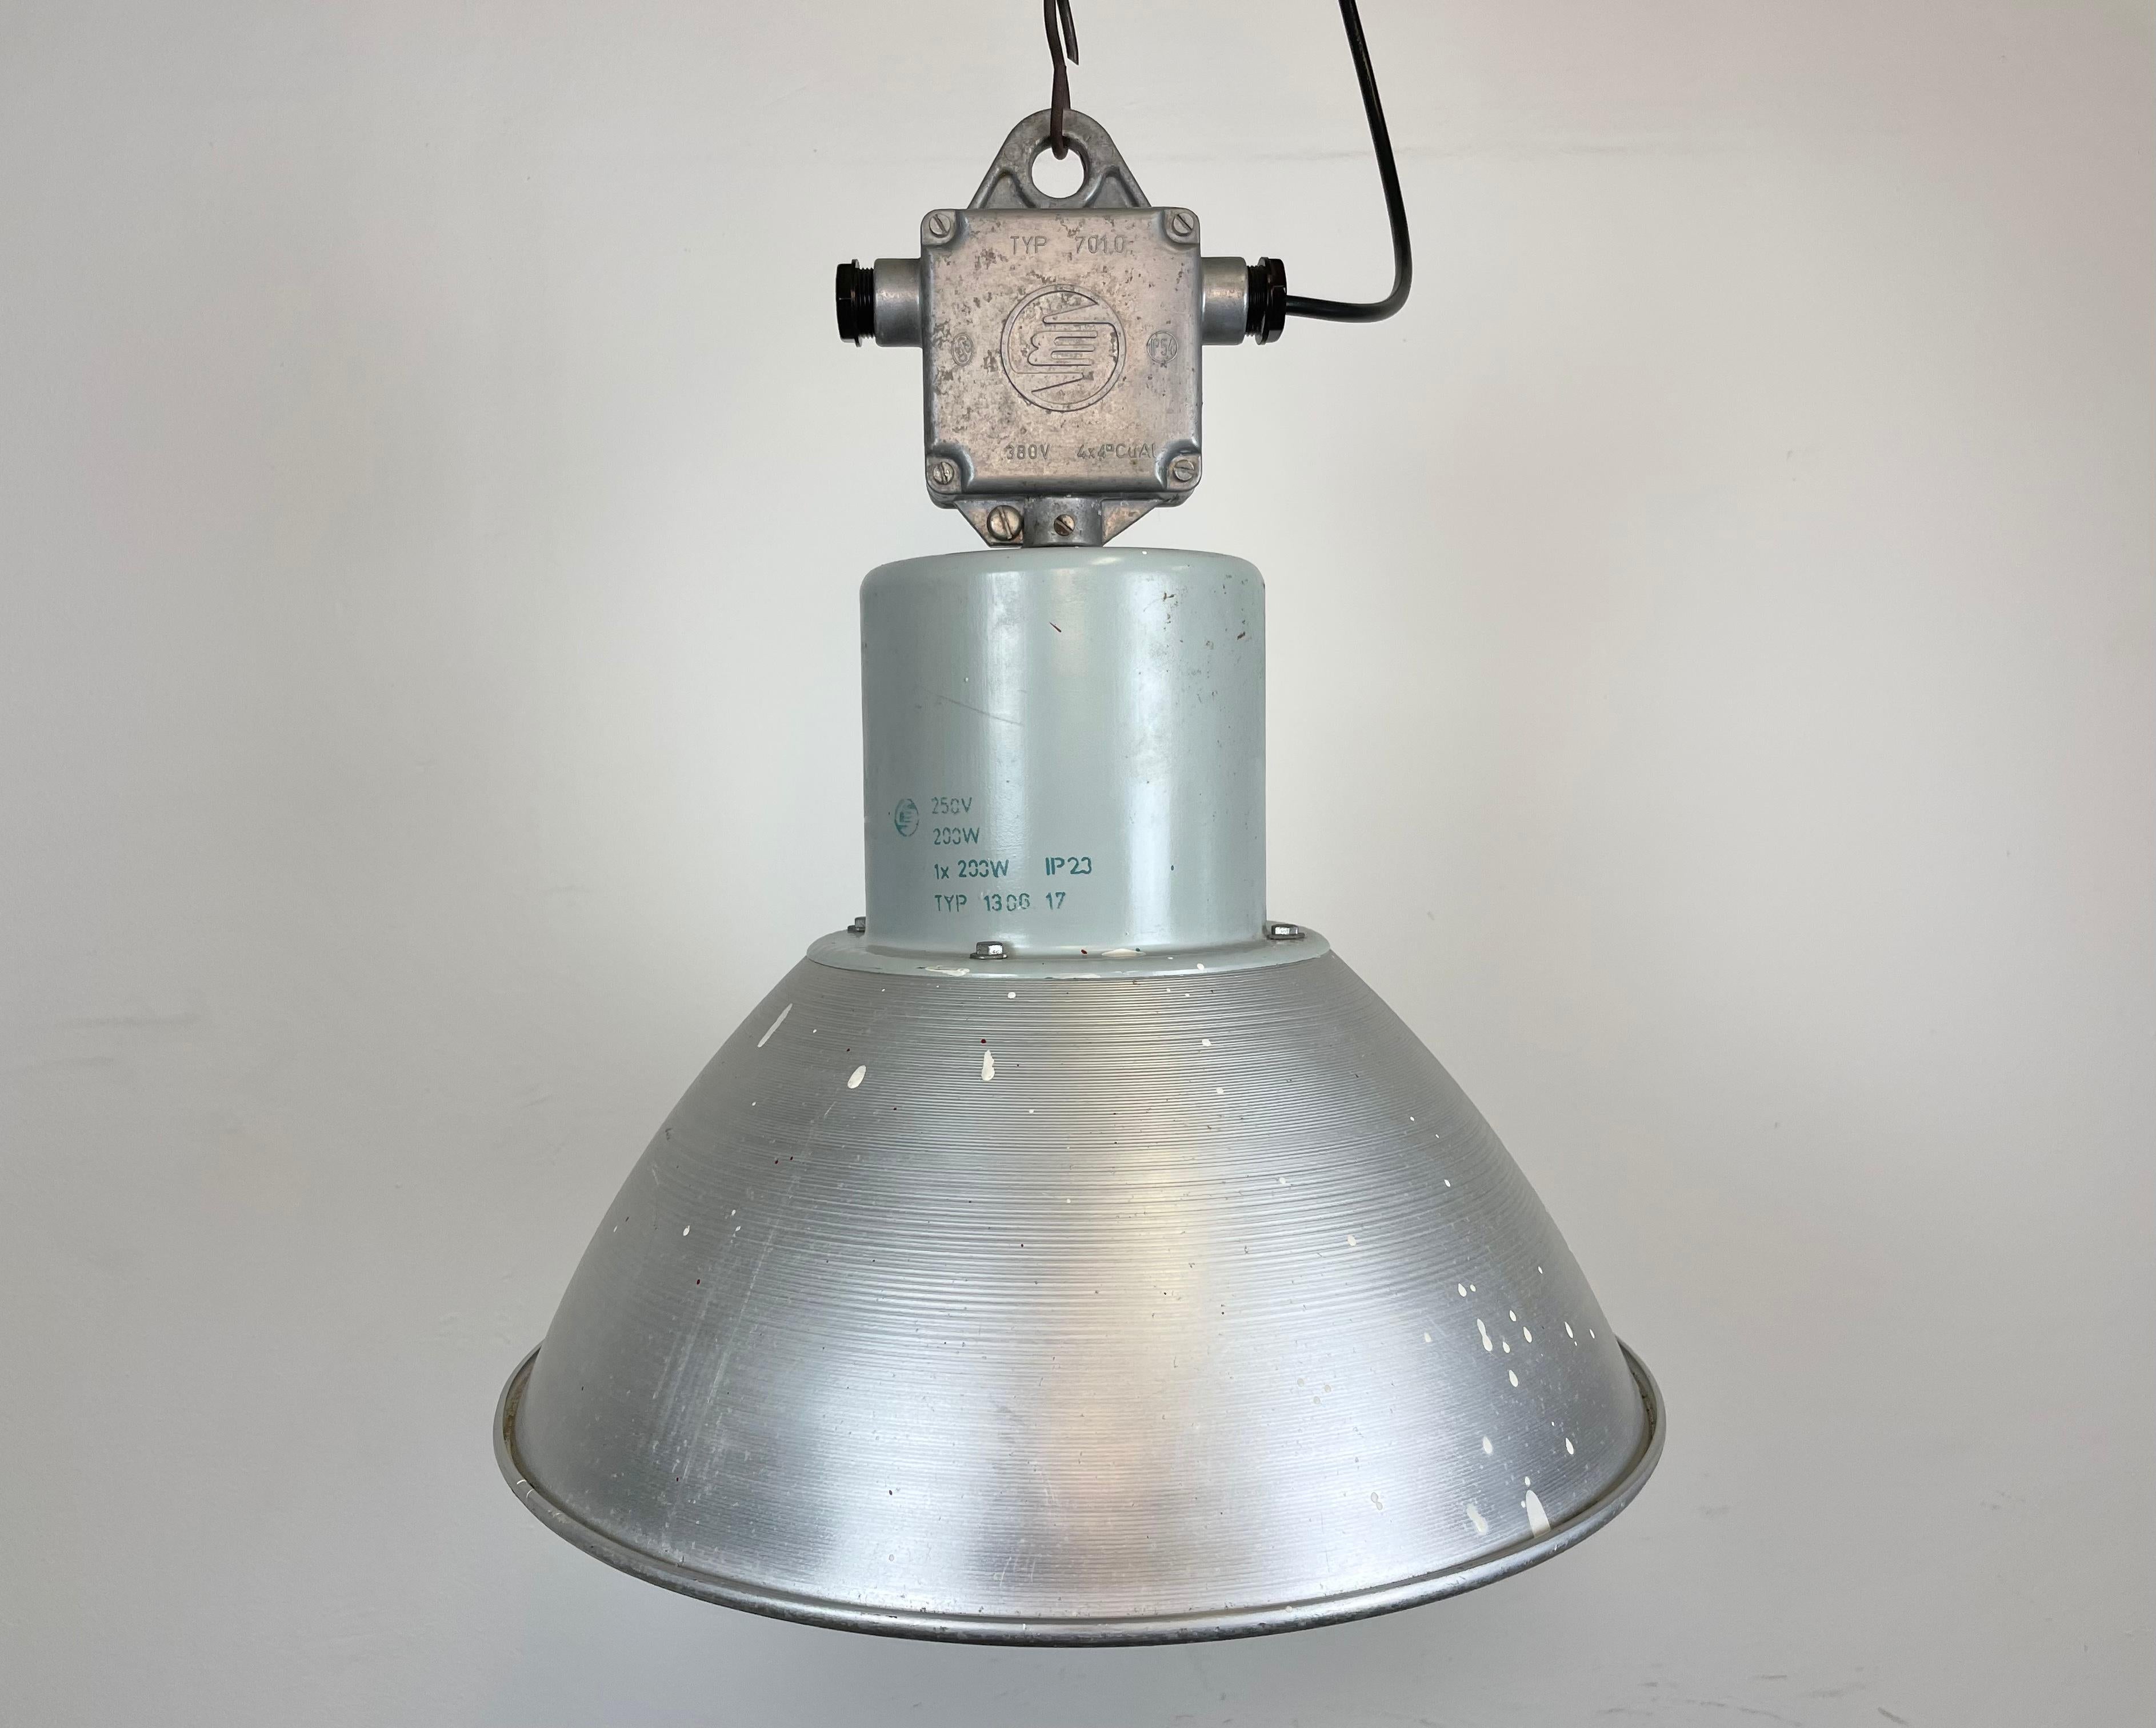 This pendant lamp was made by Elektrosvit and originally used in a factories in former Czechoslovakia in the 1960s. The piece is comprised of an aluminium lampshade and a cast aluminium top. The lamp is fully functional and features a new porcelain